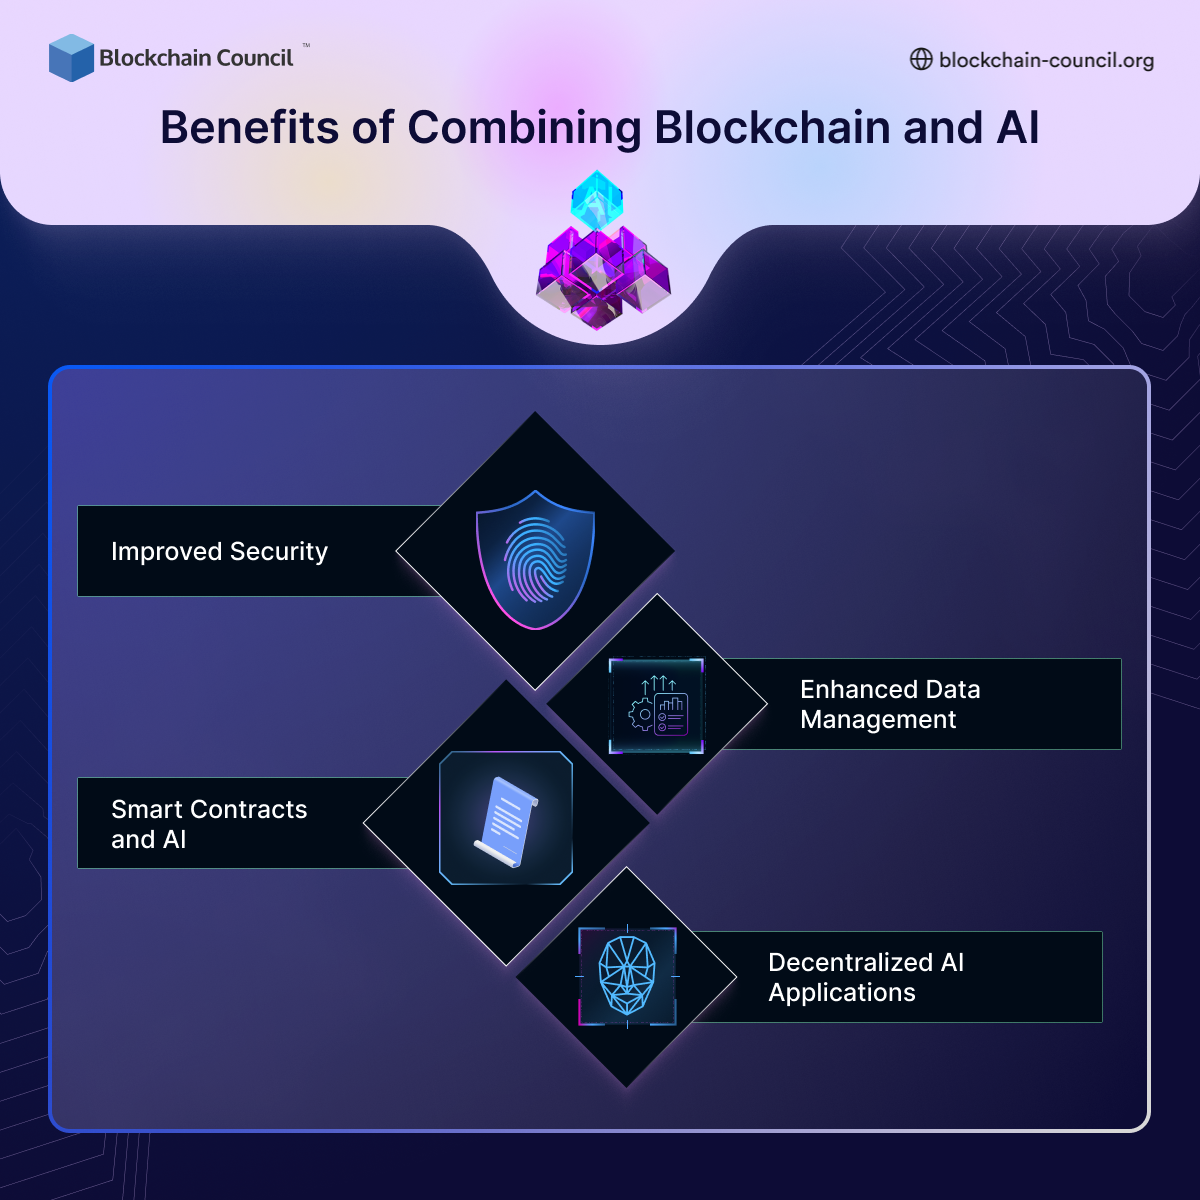 Benefits of Combining Blockchain and AI